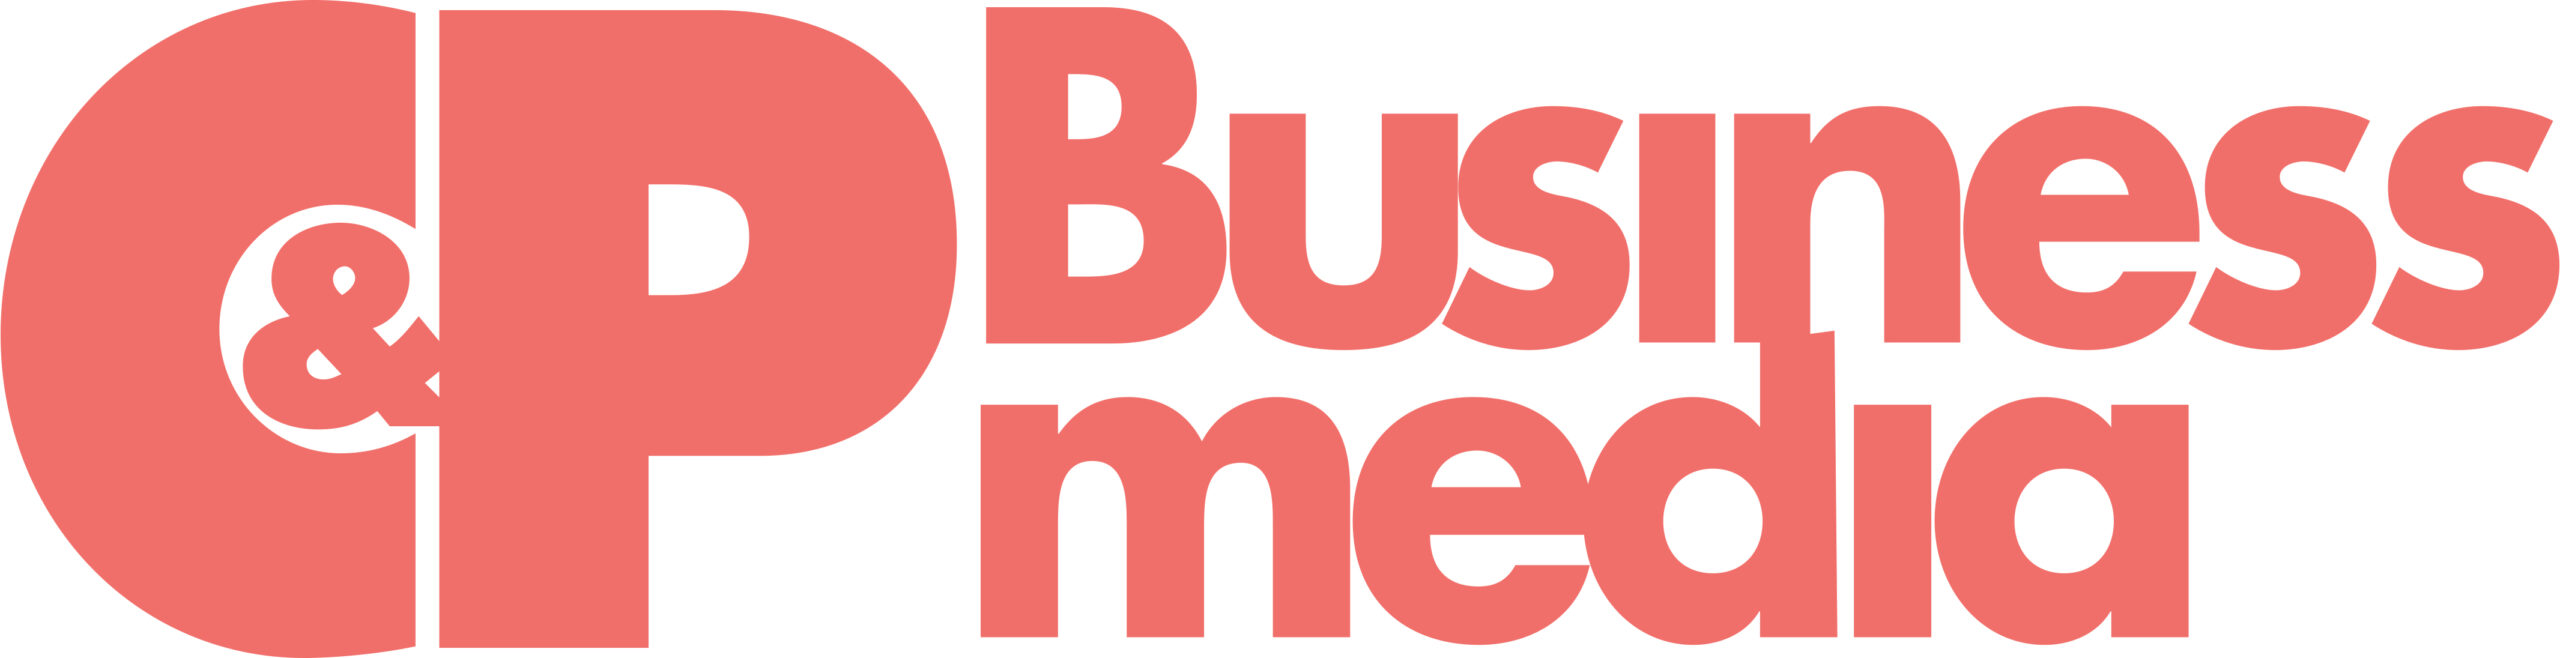 Cape and Plymouth Business Media Logo Horizontal scaled